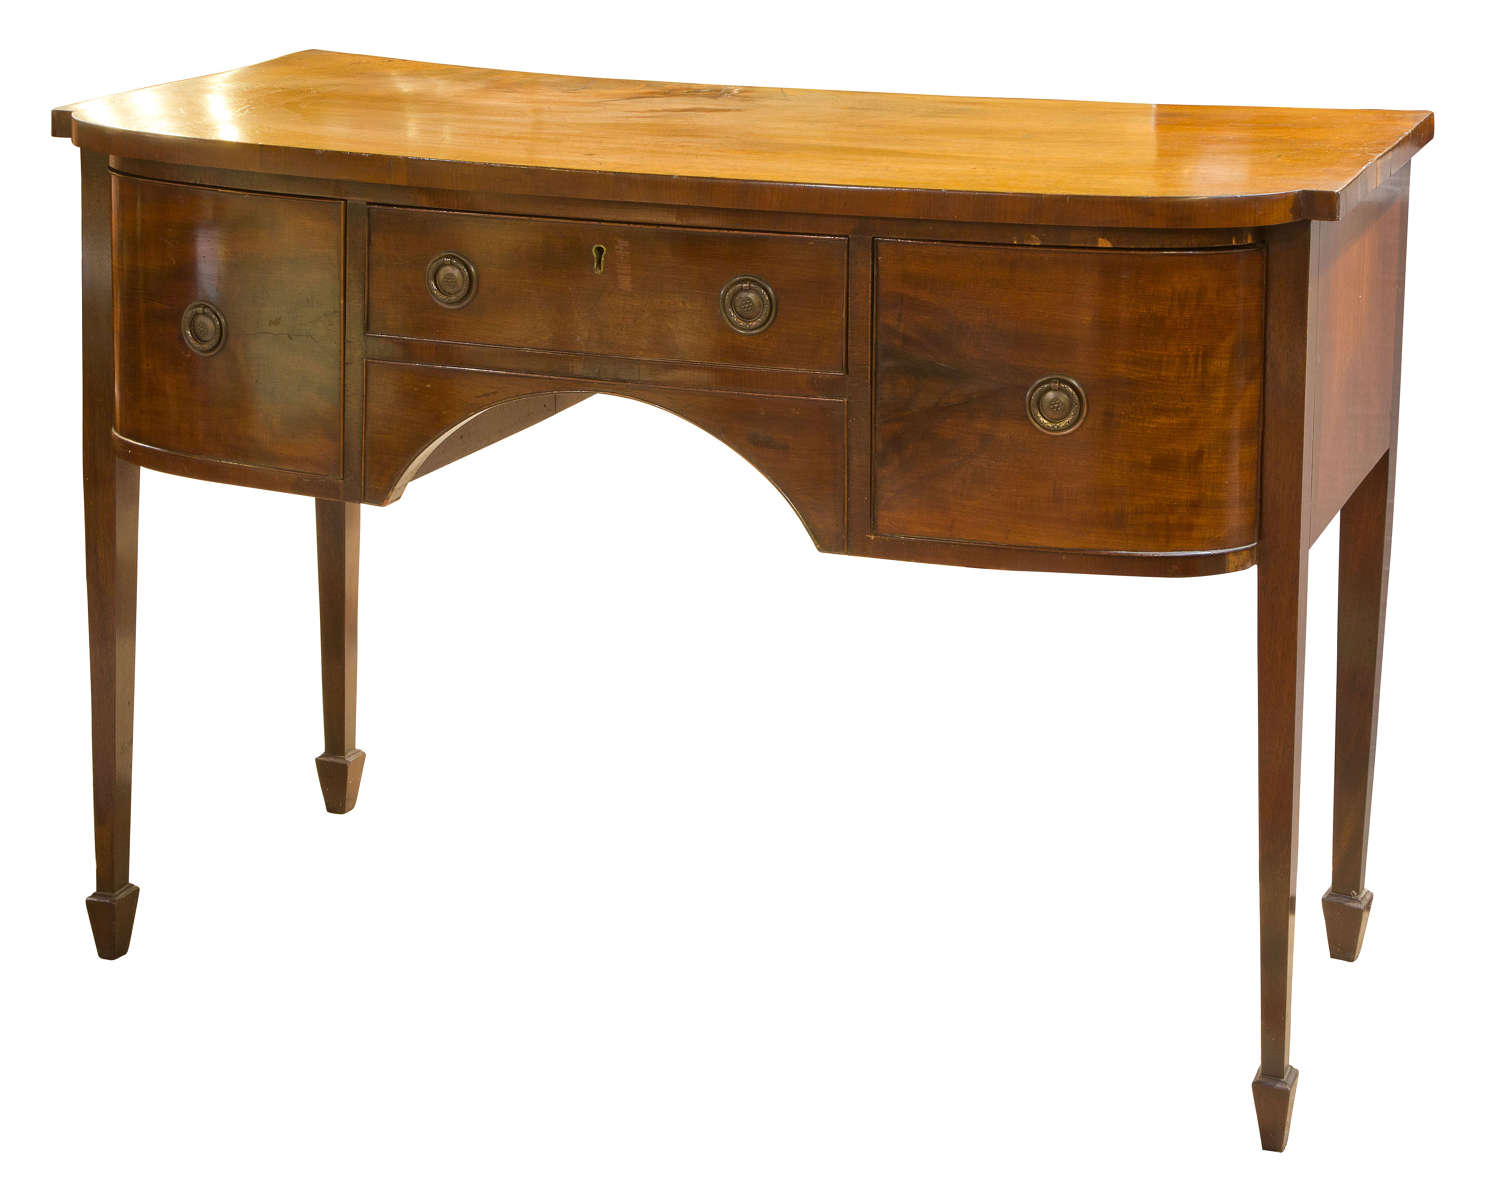 Fine quality mahogany bow-fronted dressing table